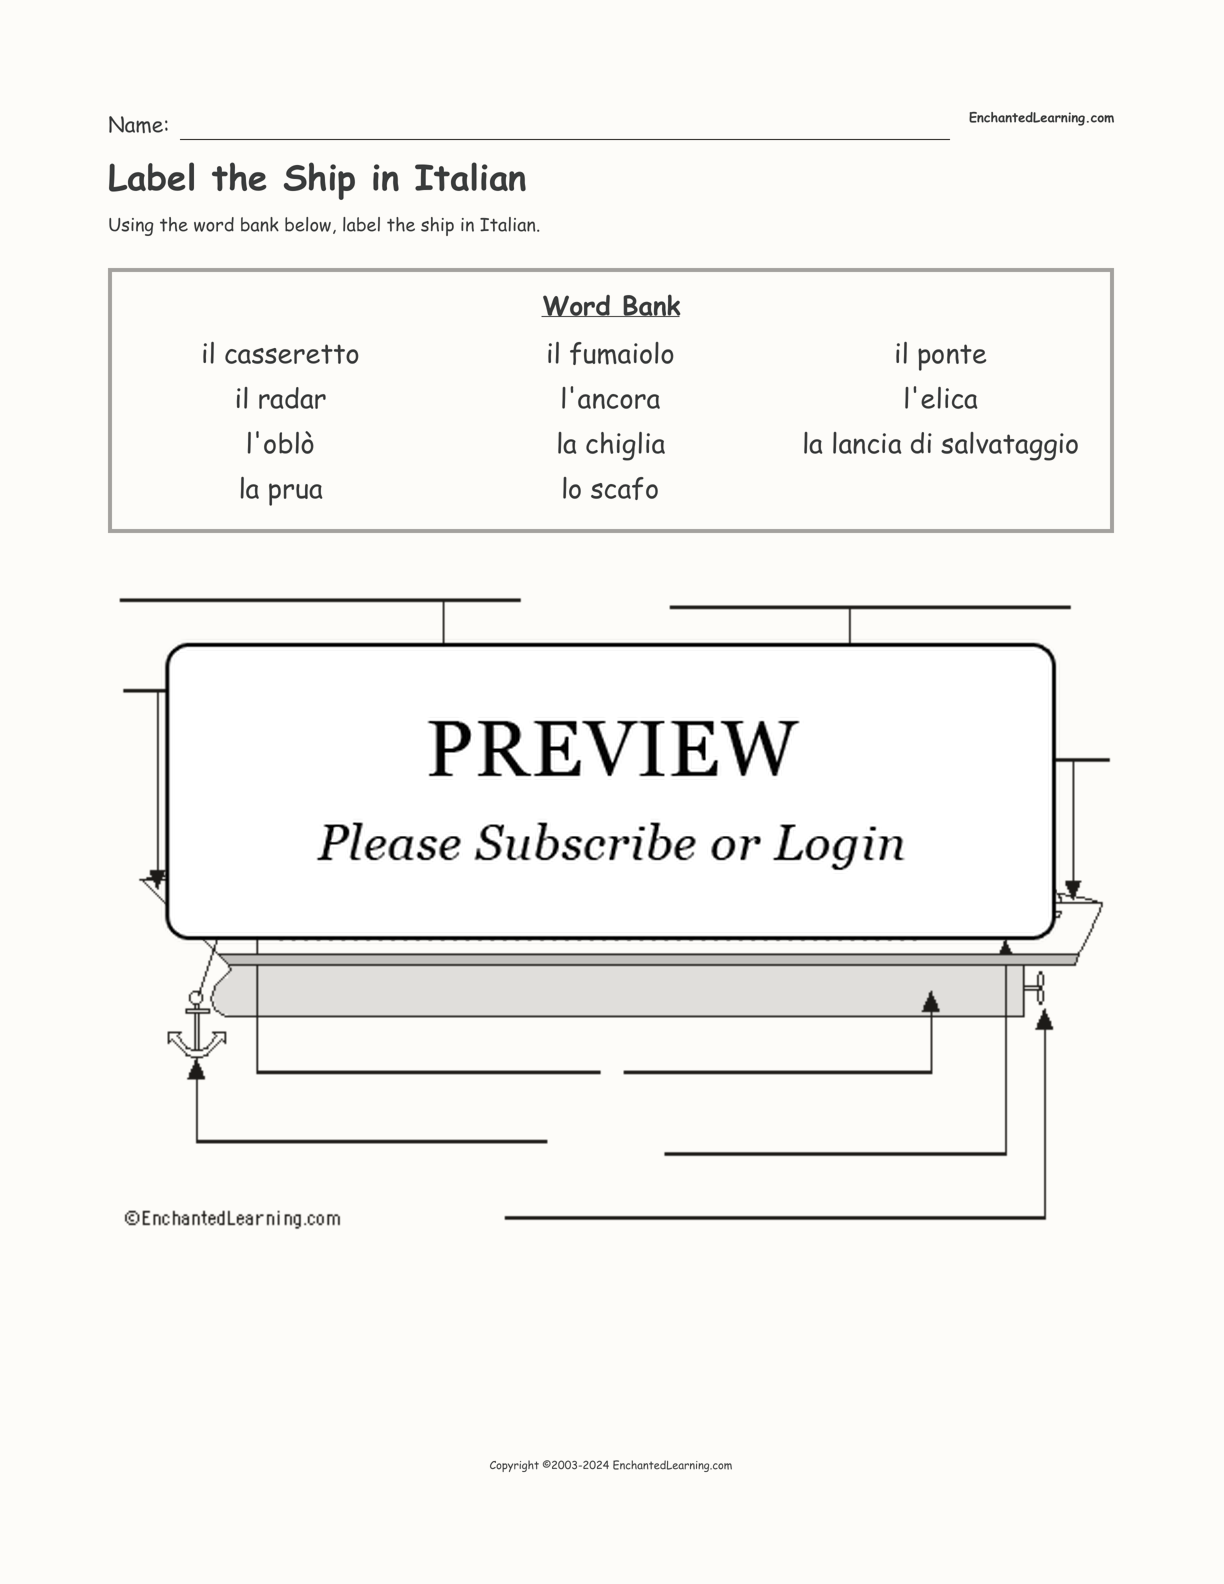 Label the Ship in Italian interactive worksheet page 1